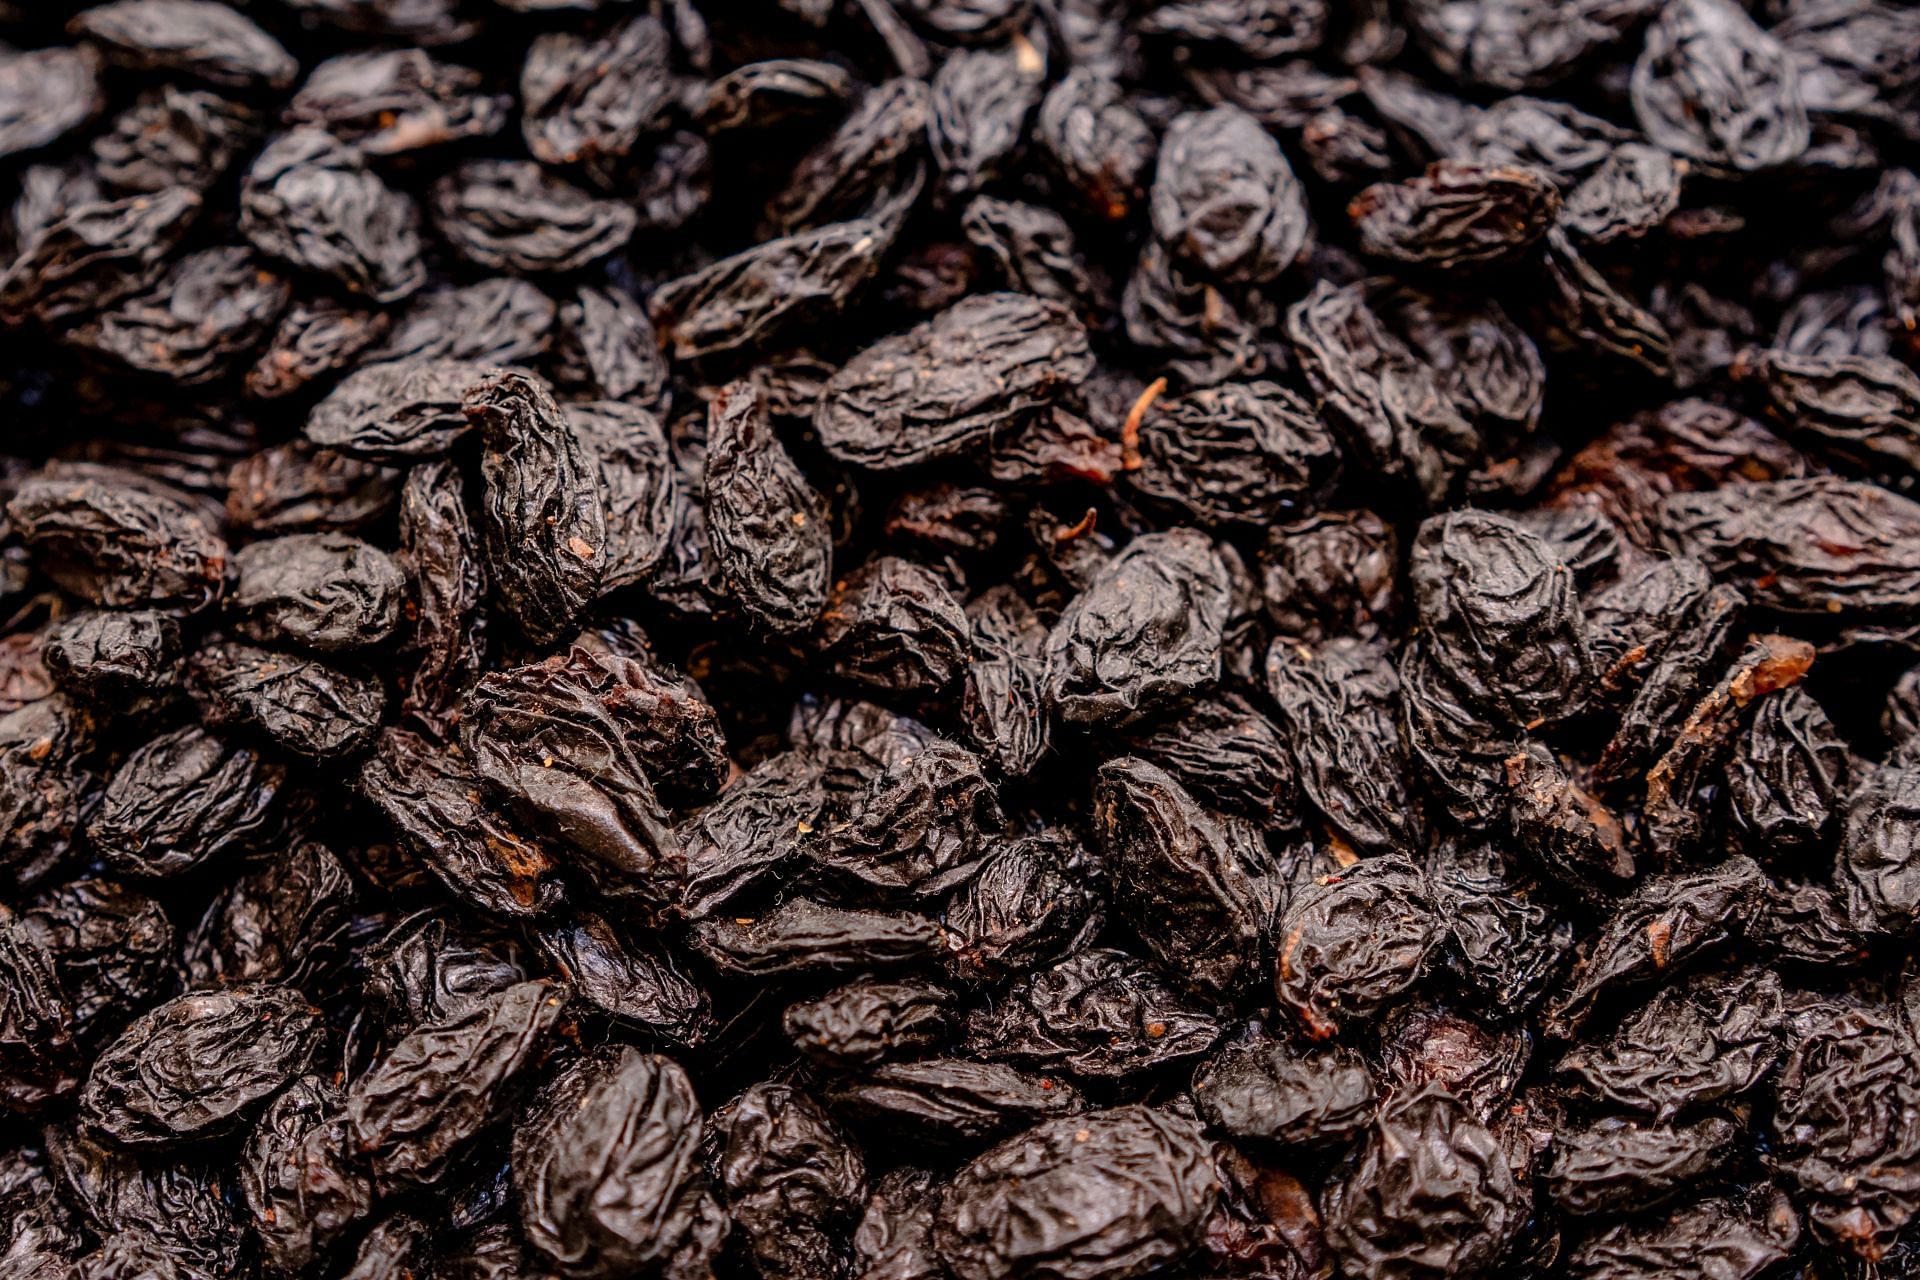 Benefits of prunes (image sourced via Pexels / Photo by klpa)